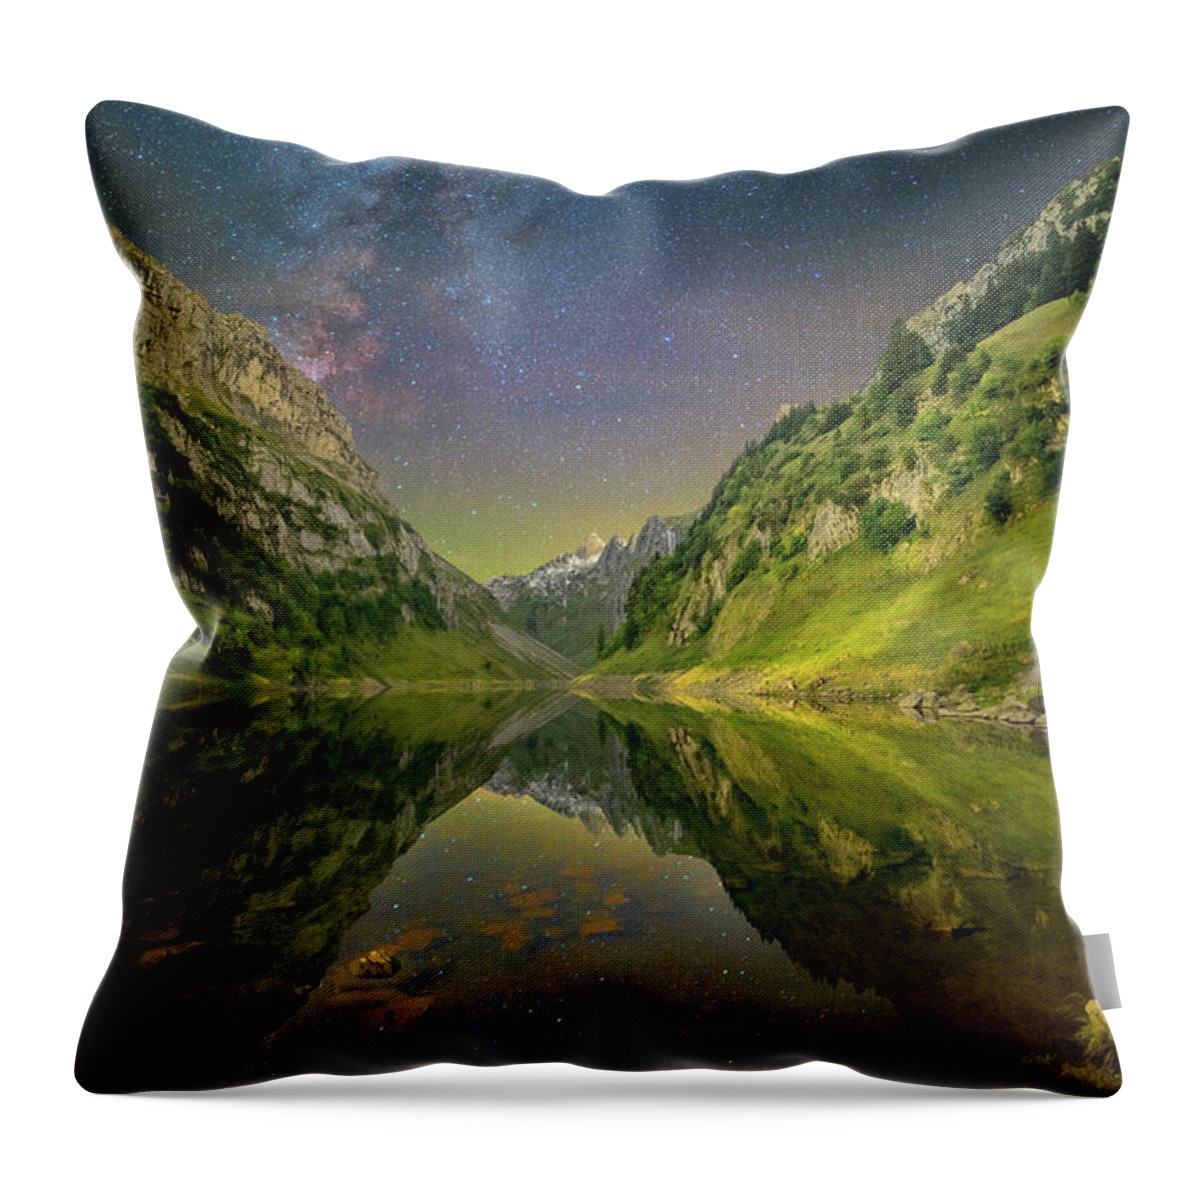 Mountains Throw Pillow featuring the photograph Faelensee Nights by Ralf Rohner